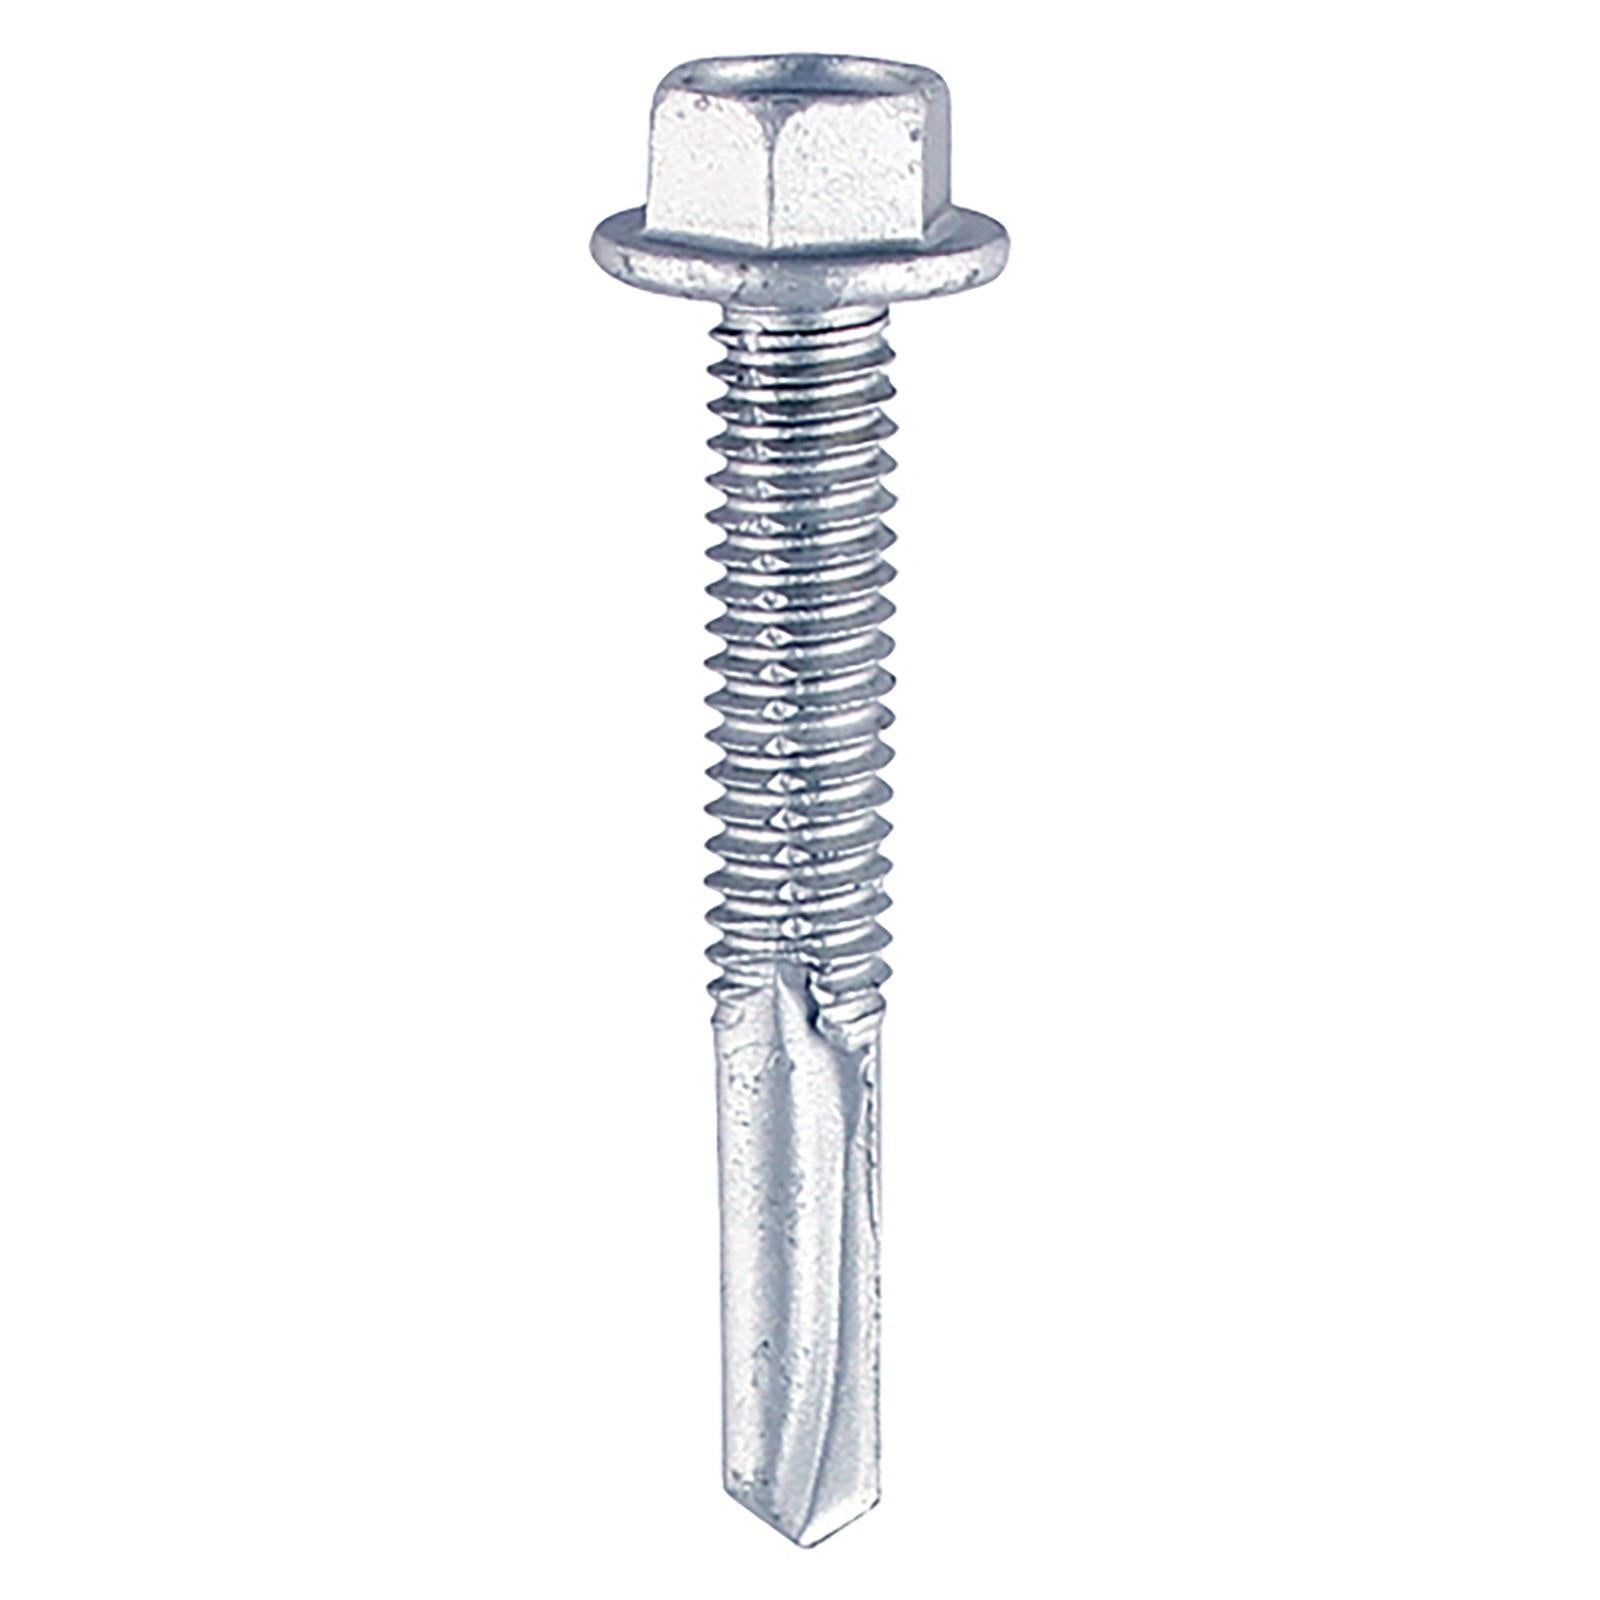 TIMCO Self Drilling Construction Screw for Heavy Section Steel with or without EPDM Washer Bi-Metal Exterior Zinc -Choose Size